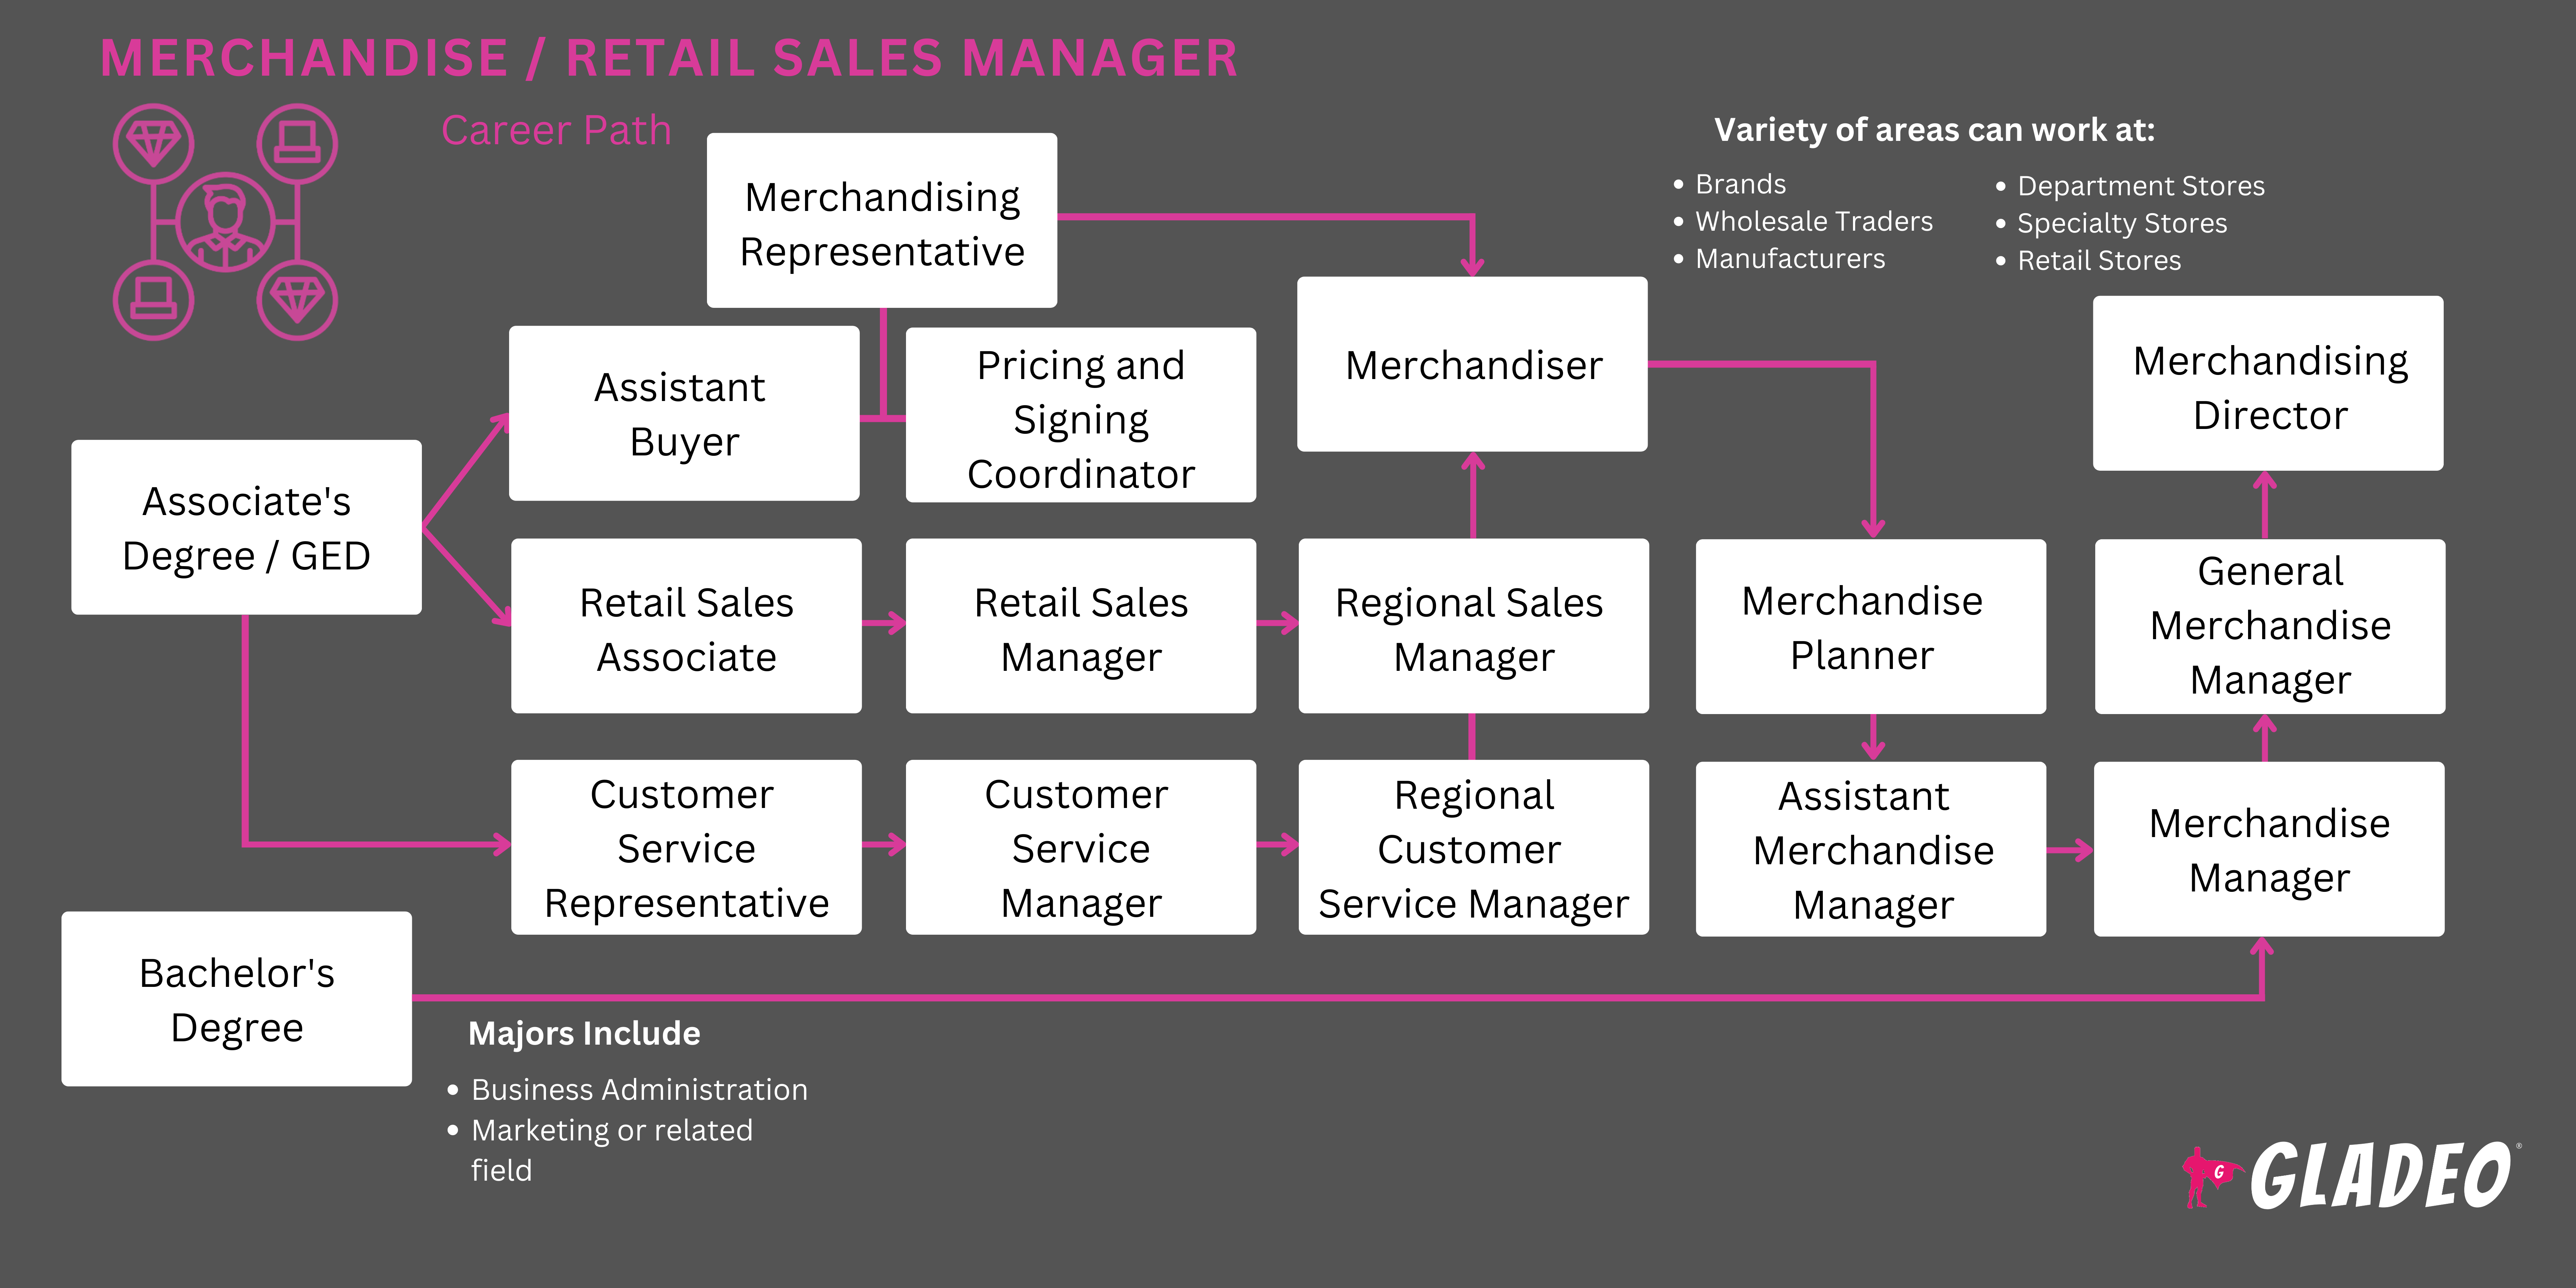 Roadmap ng Merchandise / Retail Sales Manager